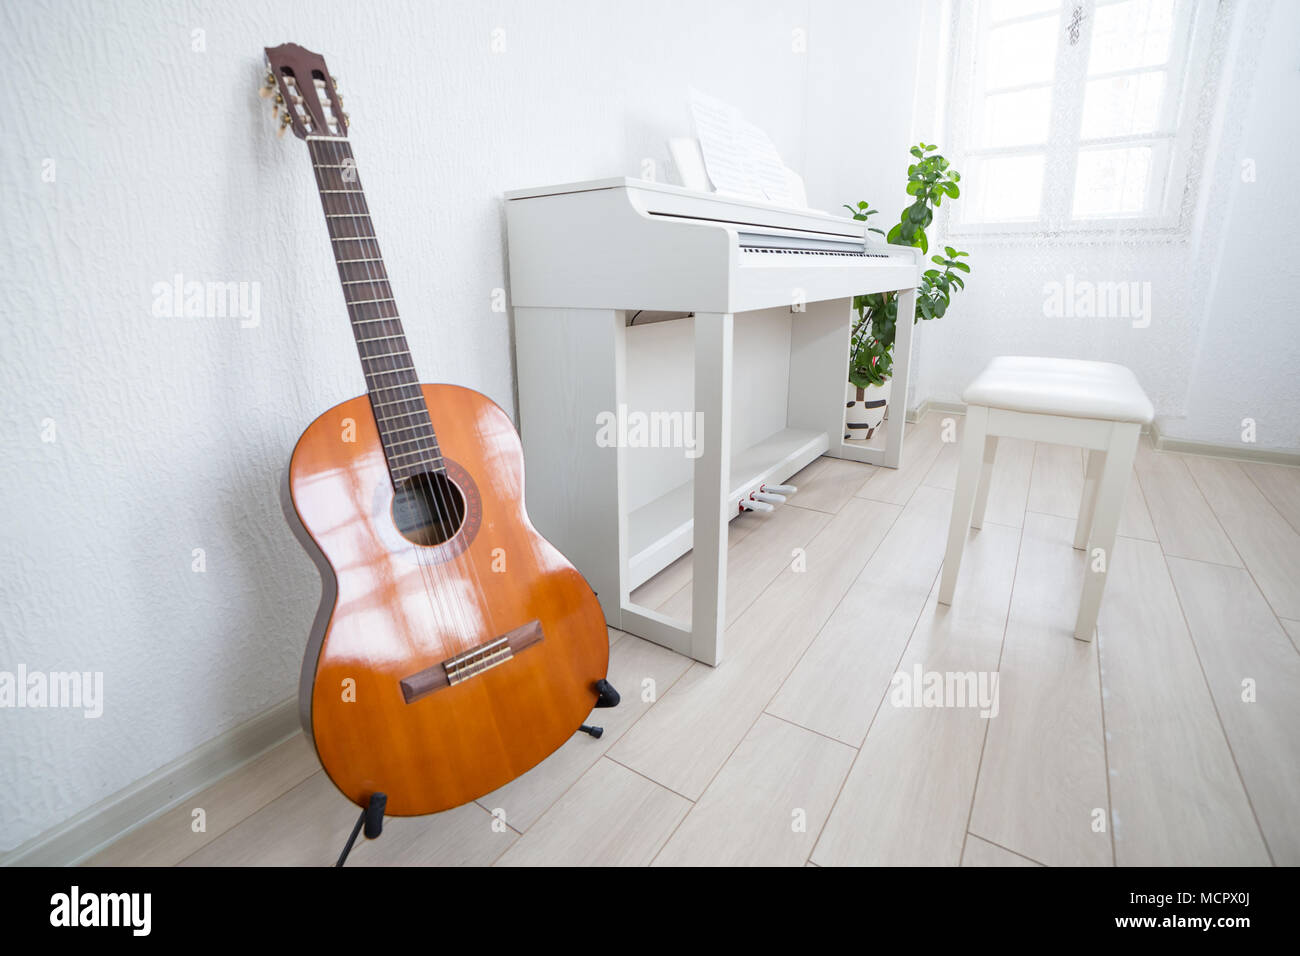 Modern daylight classroom for teaching music. Guitar, white piano and greenboard in modern music classroom Stock Photo